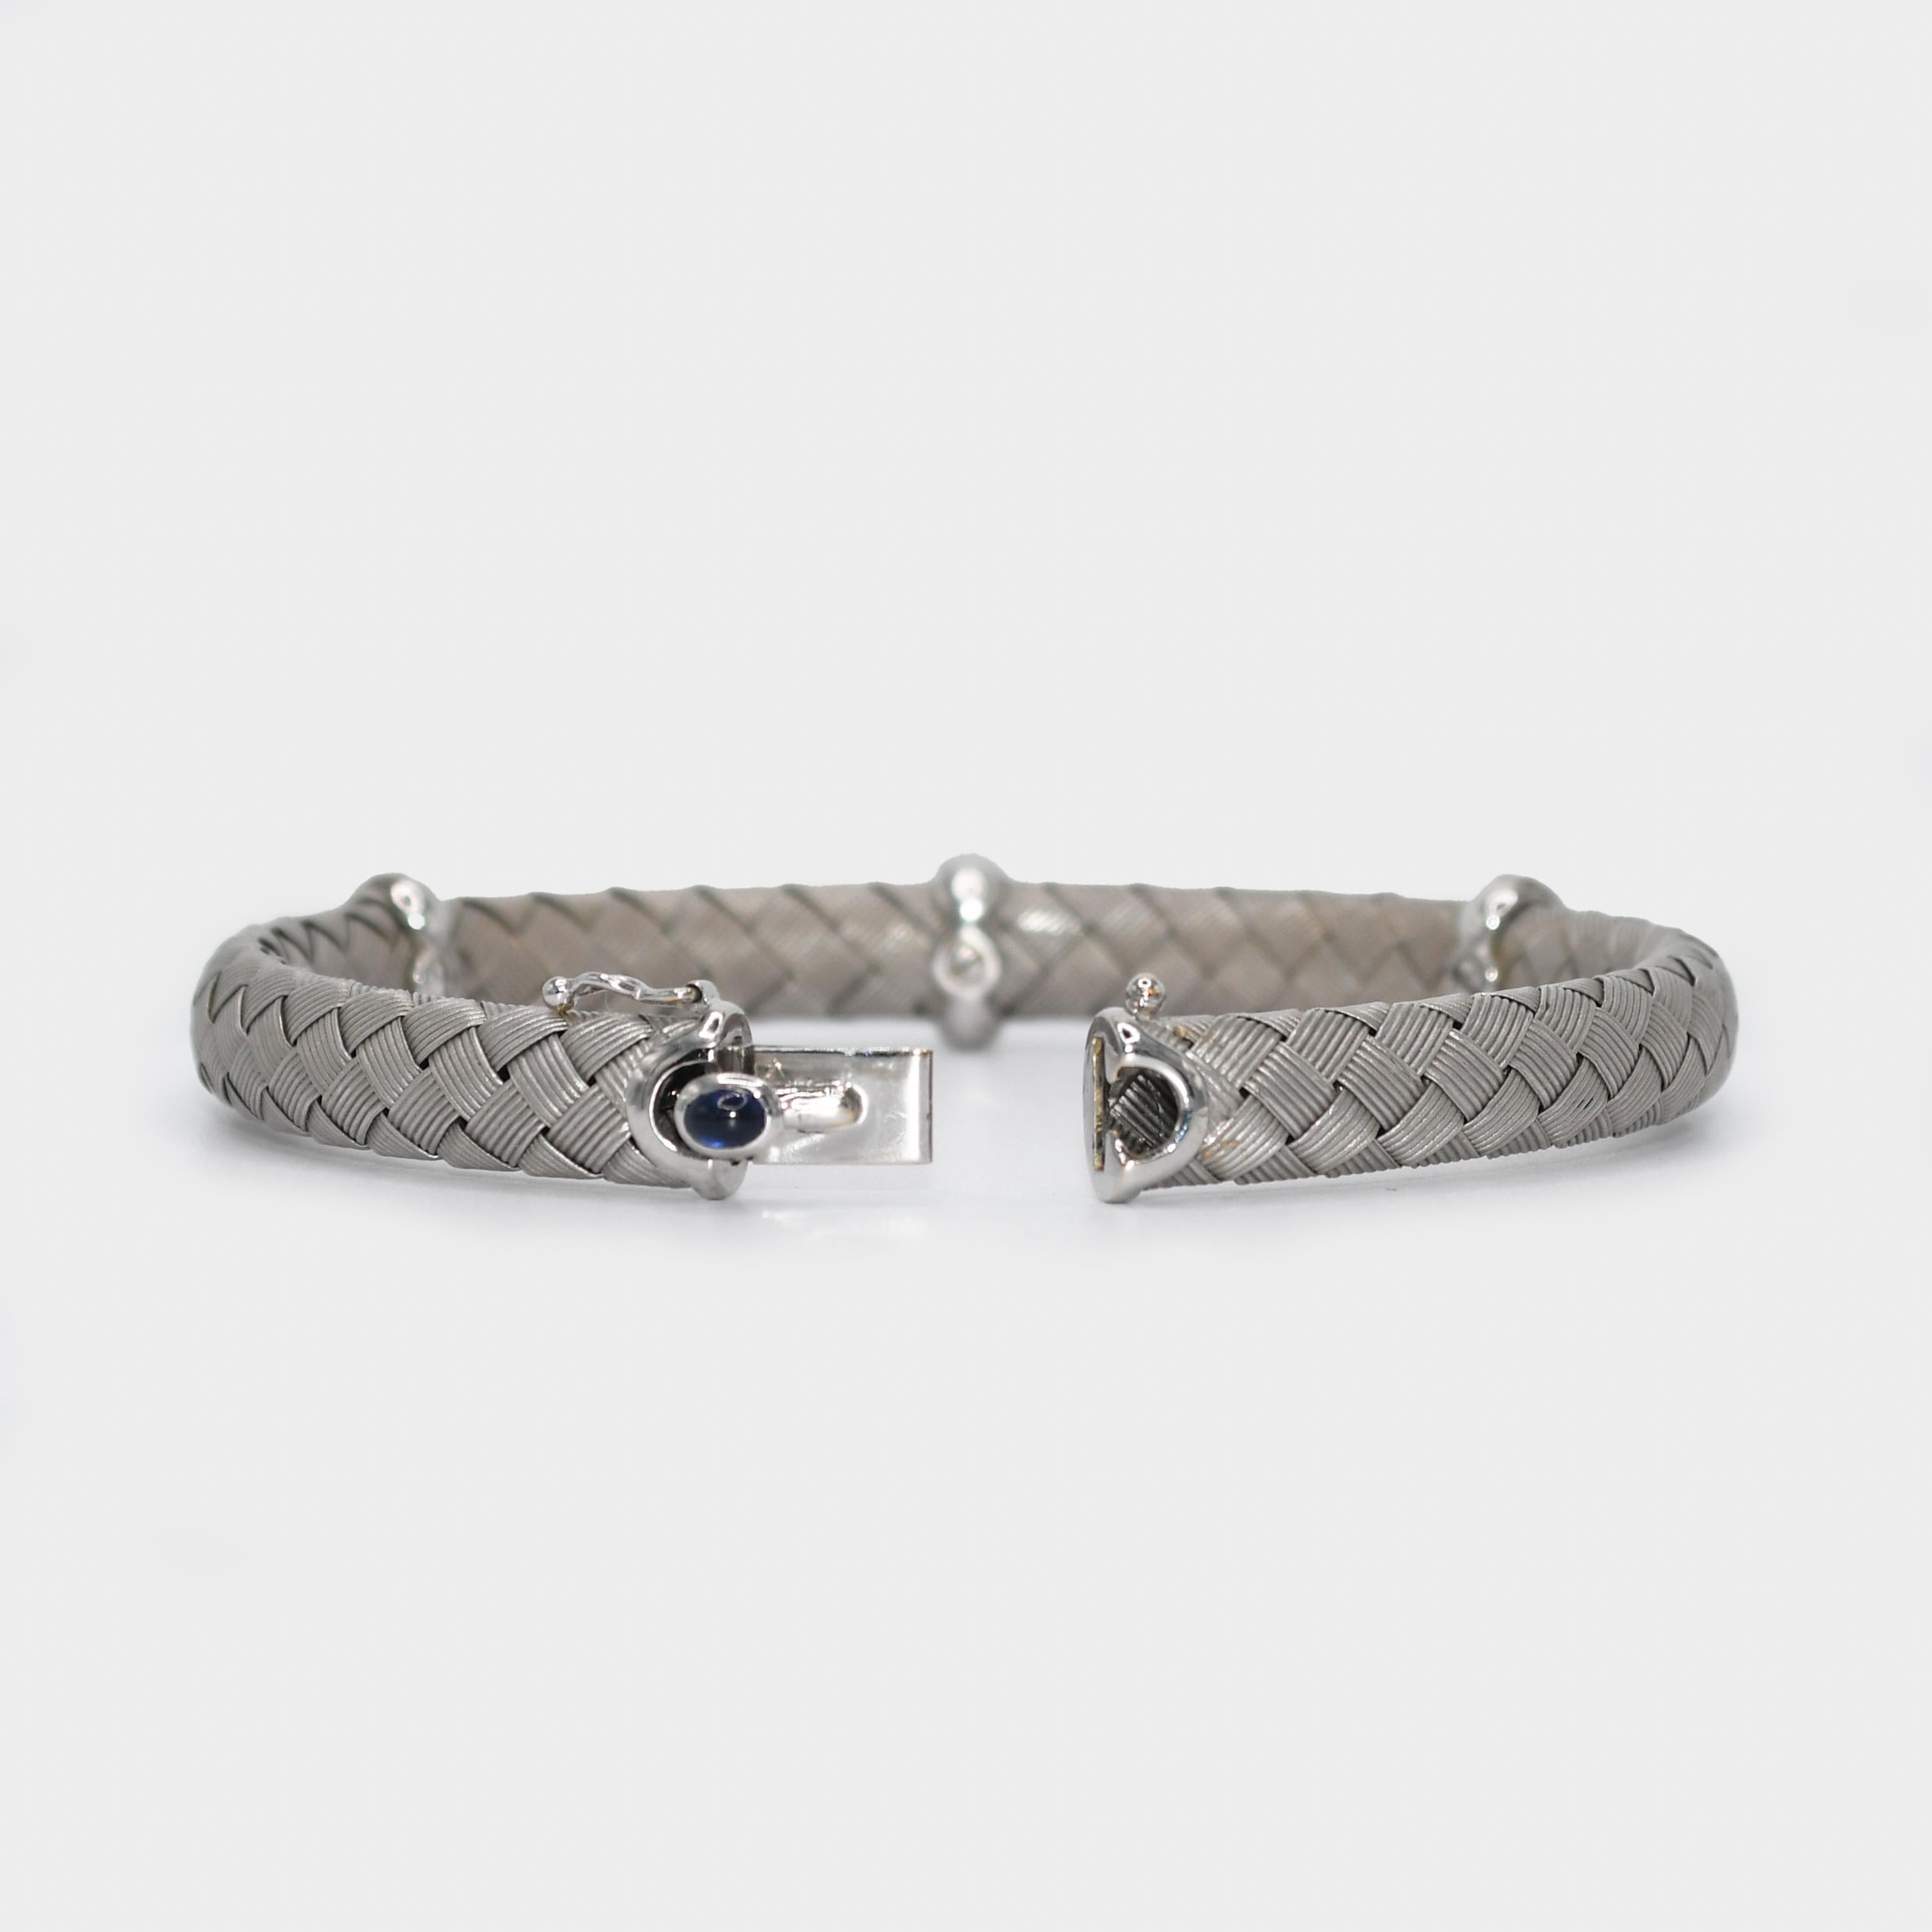 18K White Gold Woven Bracelet with Diamonds and Clasps 26.4g For Sale 2